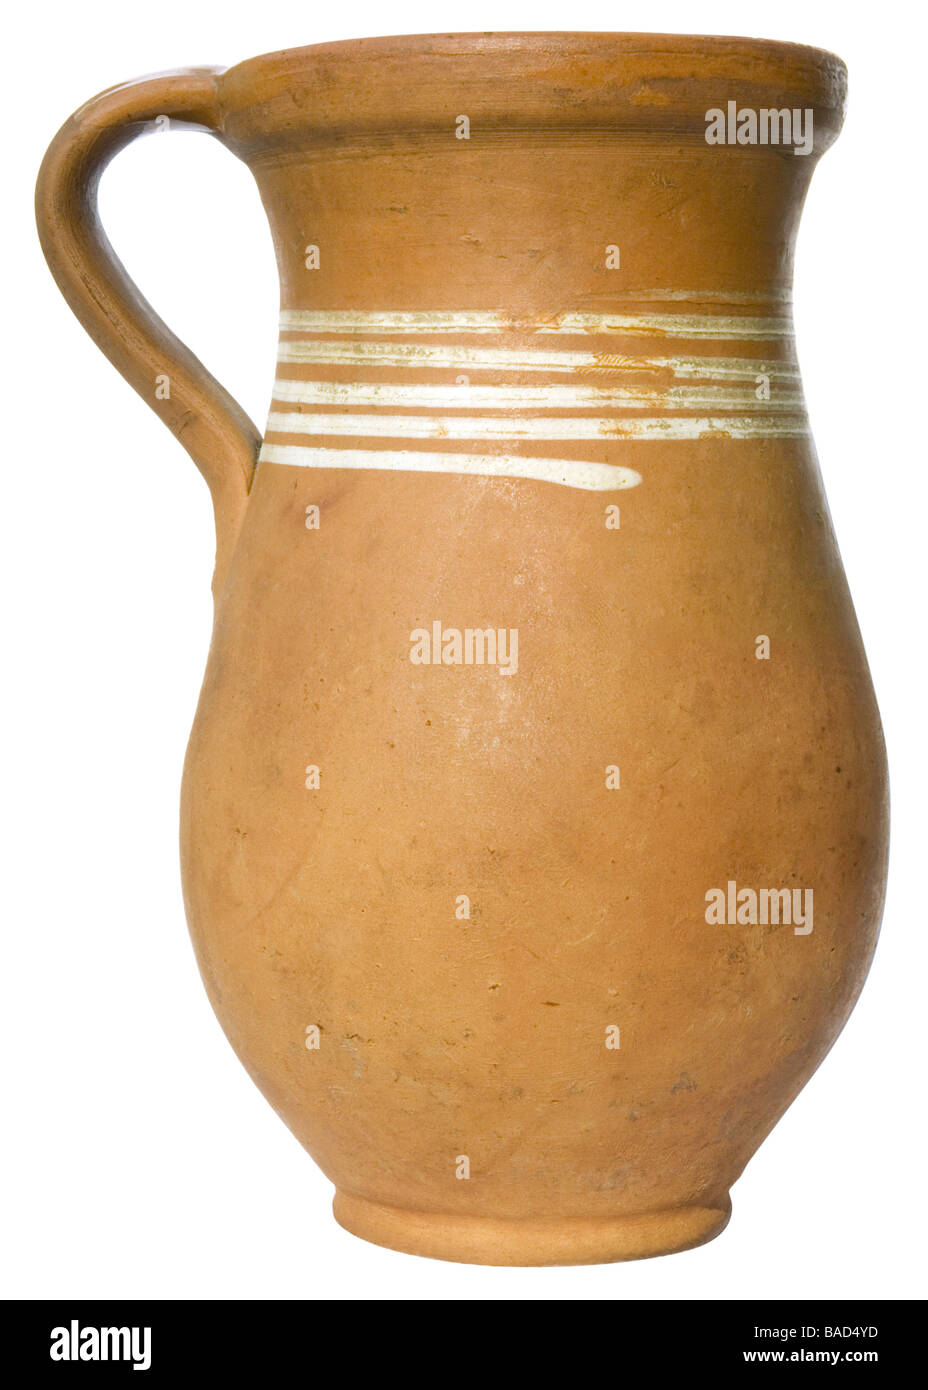 Clay pitcher isolated with clipping path Banque D'Images